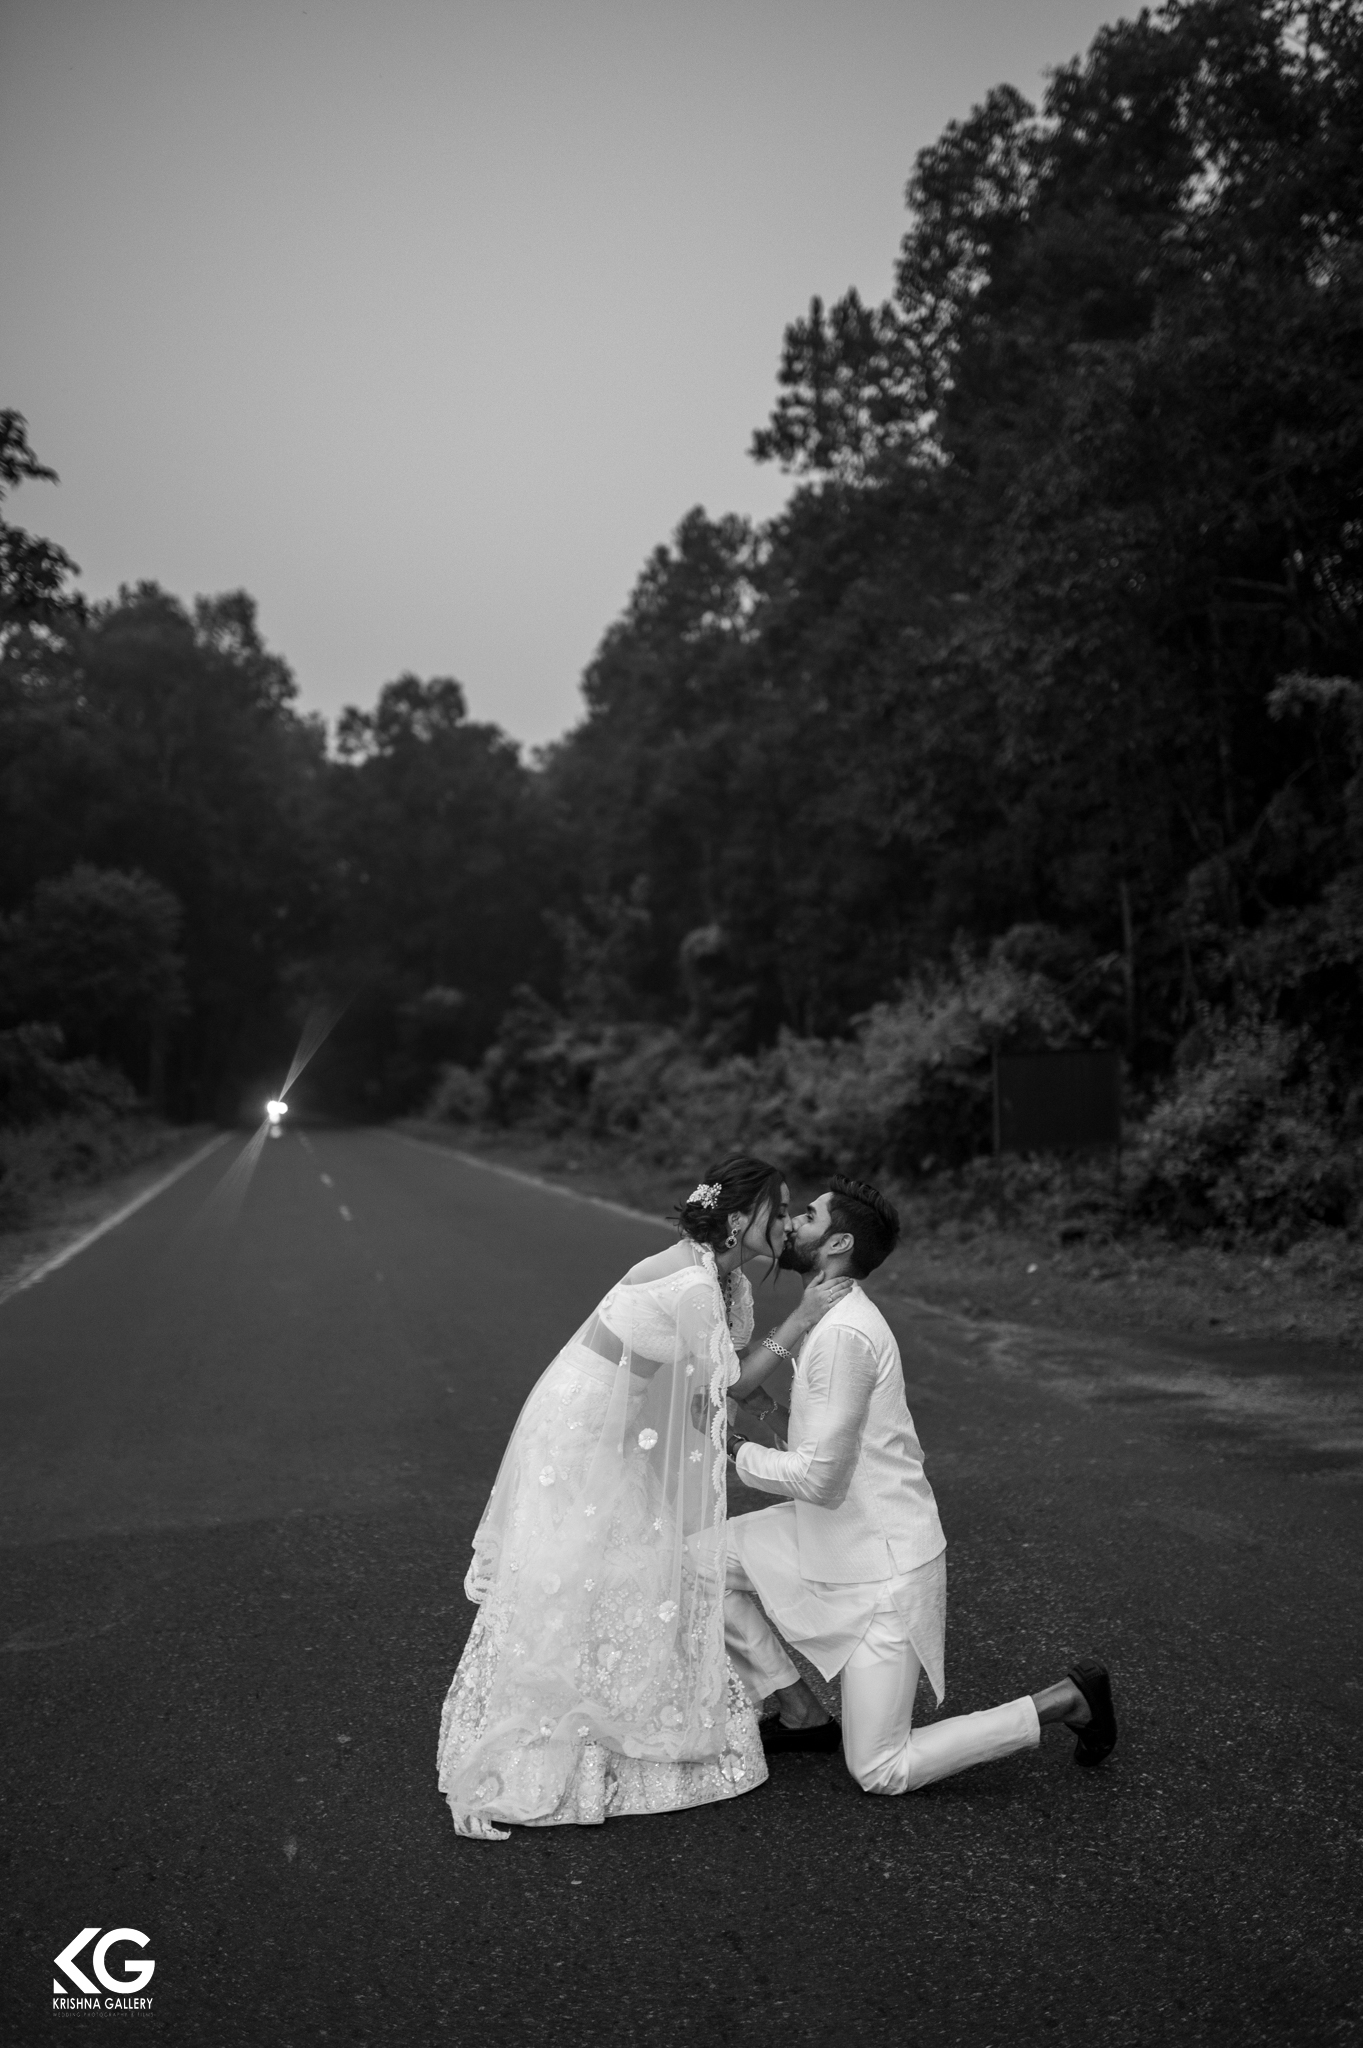 Best Outdoor Photography,Lataguri pre-wedding shoot,Enchanting nature beauty, romantic proposal, matching couple outfits, natural bliss photography, tender moments, walking hand in hand, Krishna Gallery Wedding Photography And Films.